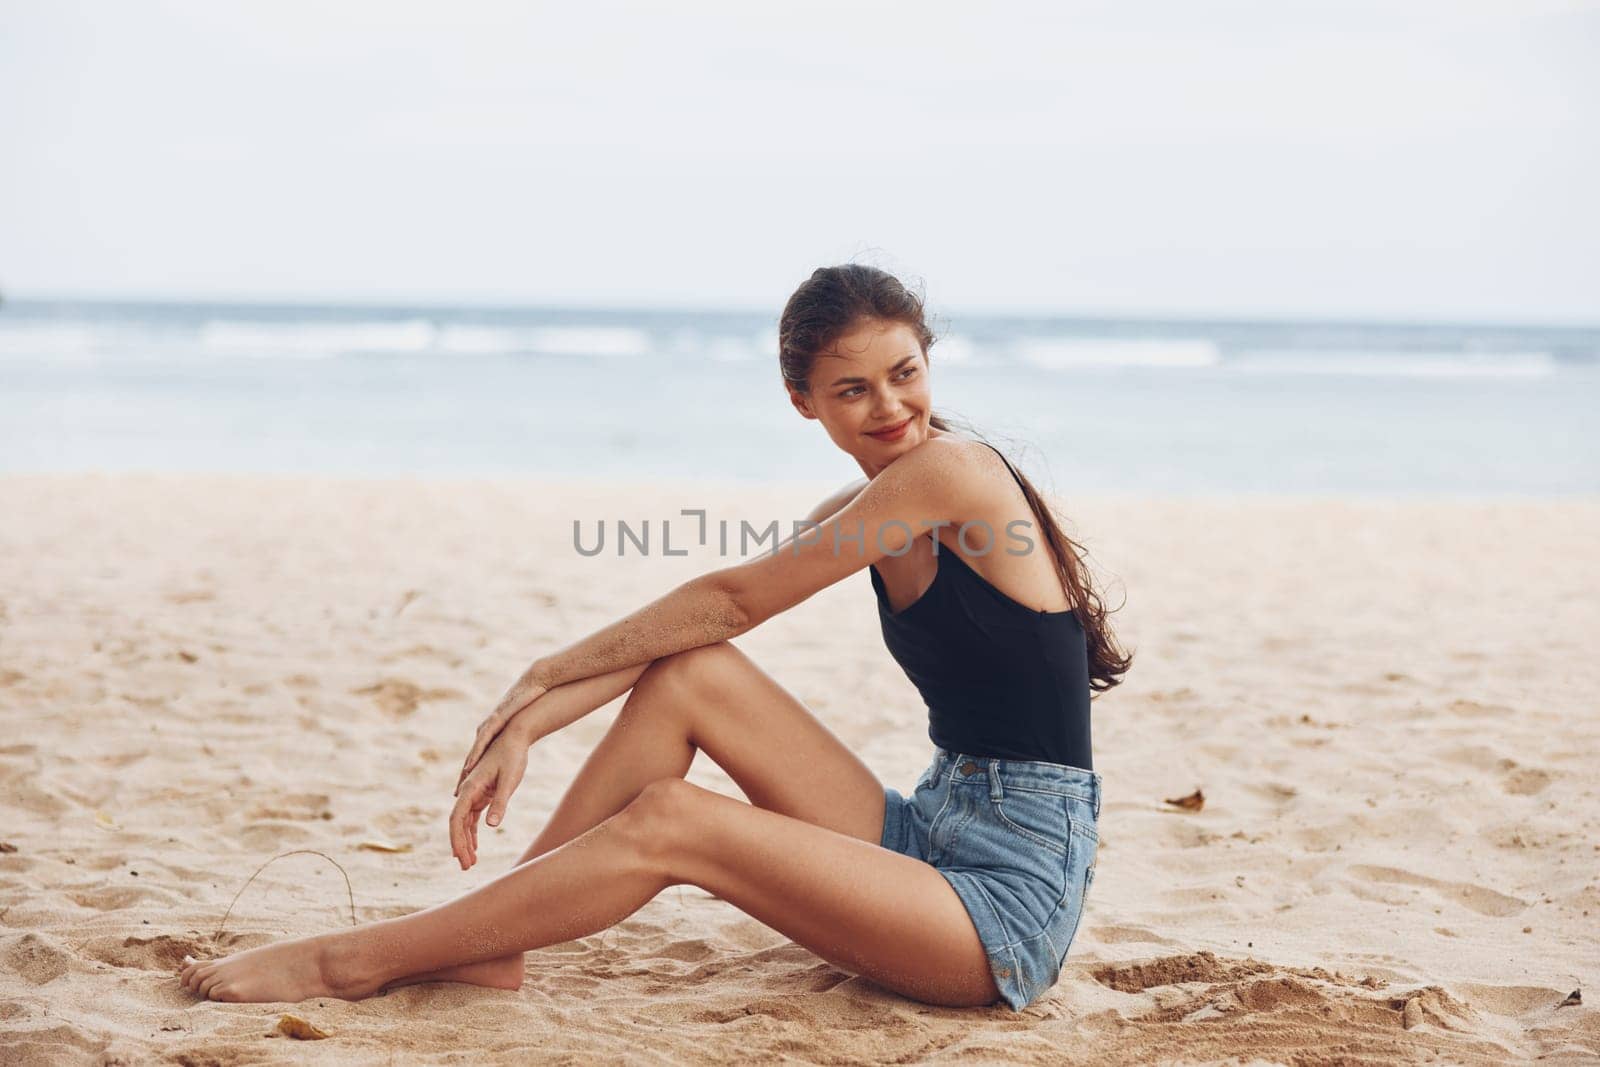 woman body smile travel fashion ocean sea hair coast sand alone sitting nature person vacation freedom outdoor beach relax lifestyle holiday